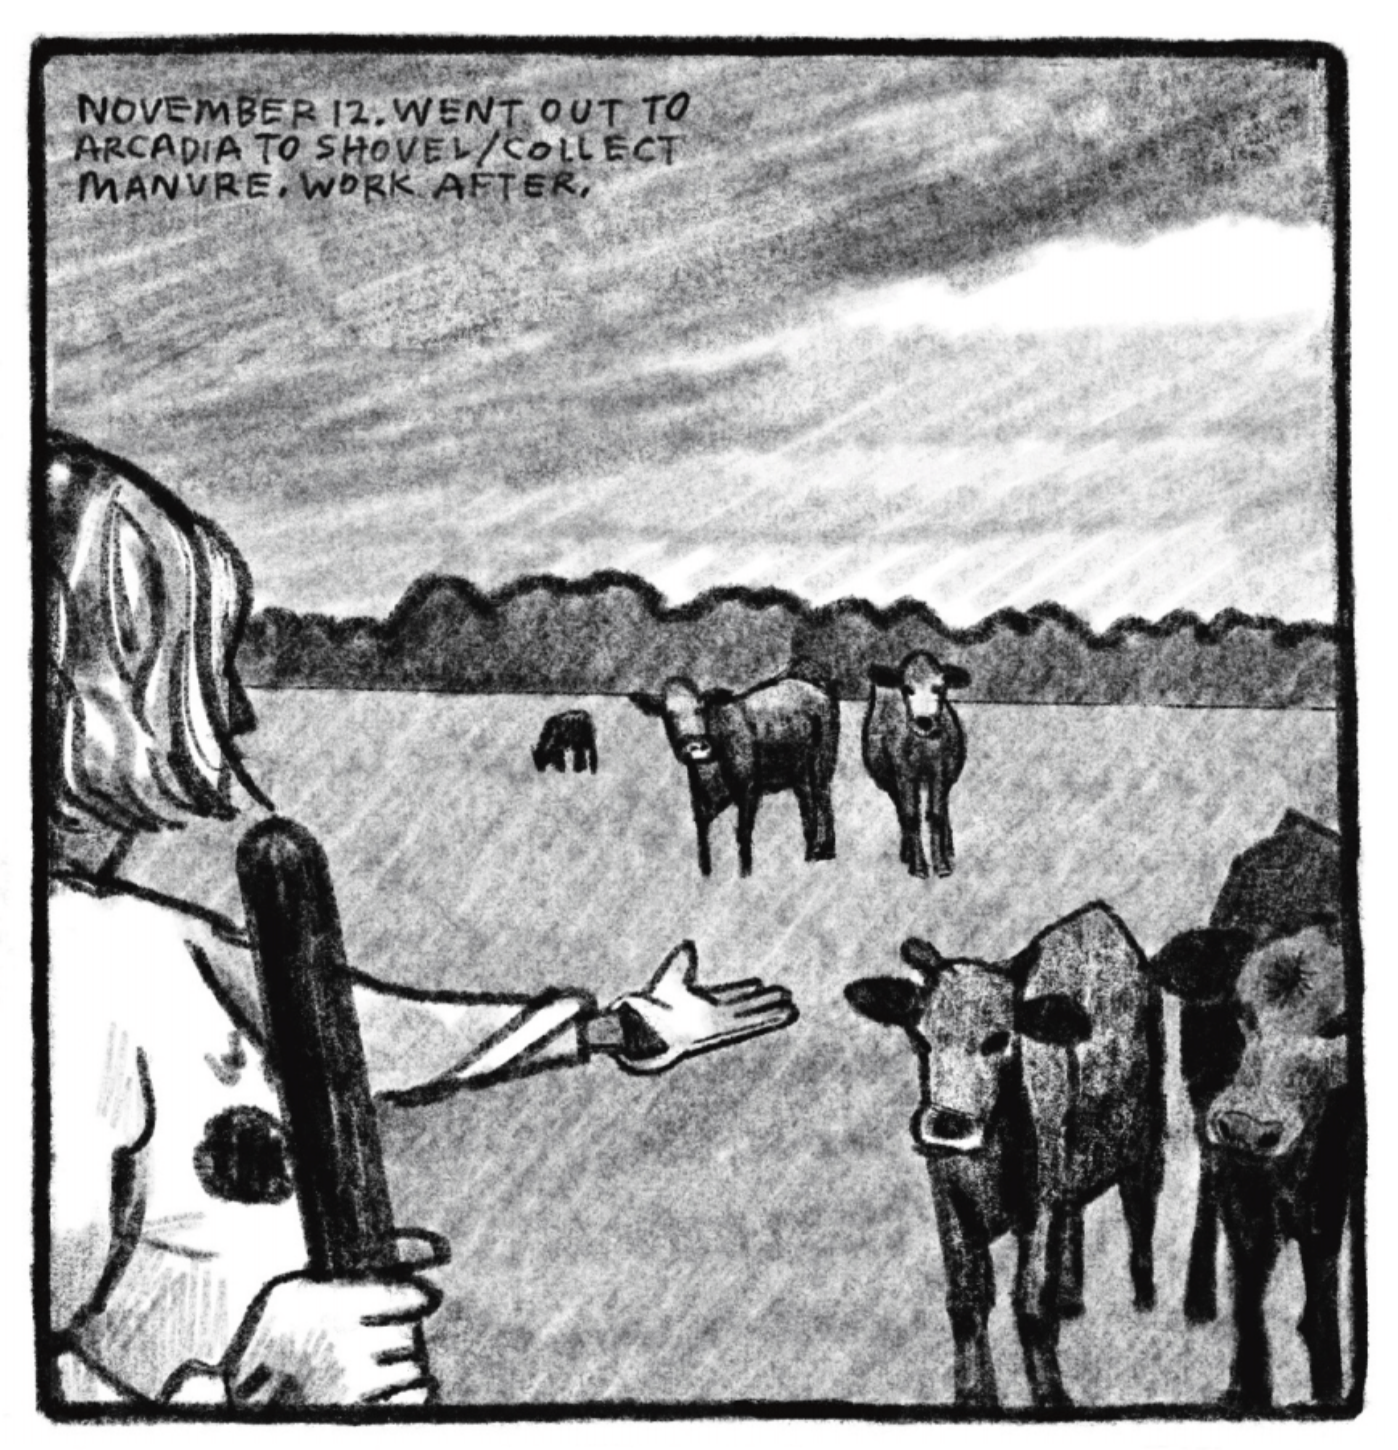 Kim is standing outside, reaching her left arm out, gloved palm up, gesturing towards two cows standing in front of her. She is holding the staff end of a gardening tool in her right hand, but the rest is cut off. Three more cows are further off in the distance. They are all standing in a wide open grassy field. The sky is overcast. â€œNovember 12. Went out to Arcadia to shovel/collect manure. Work after.â€